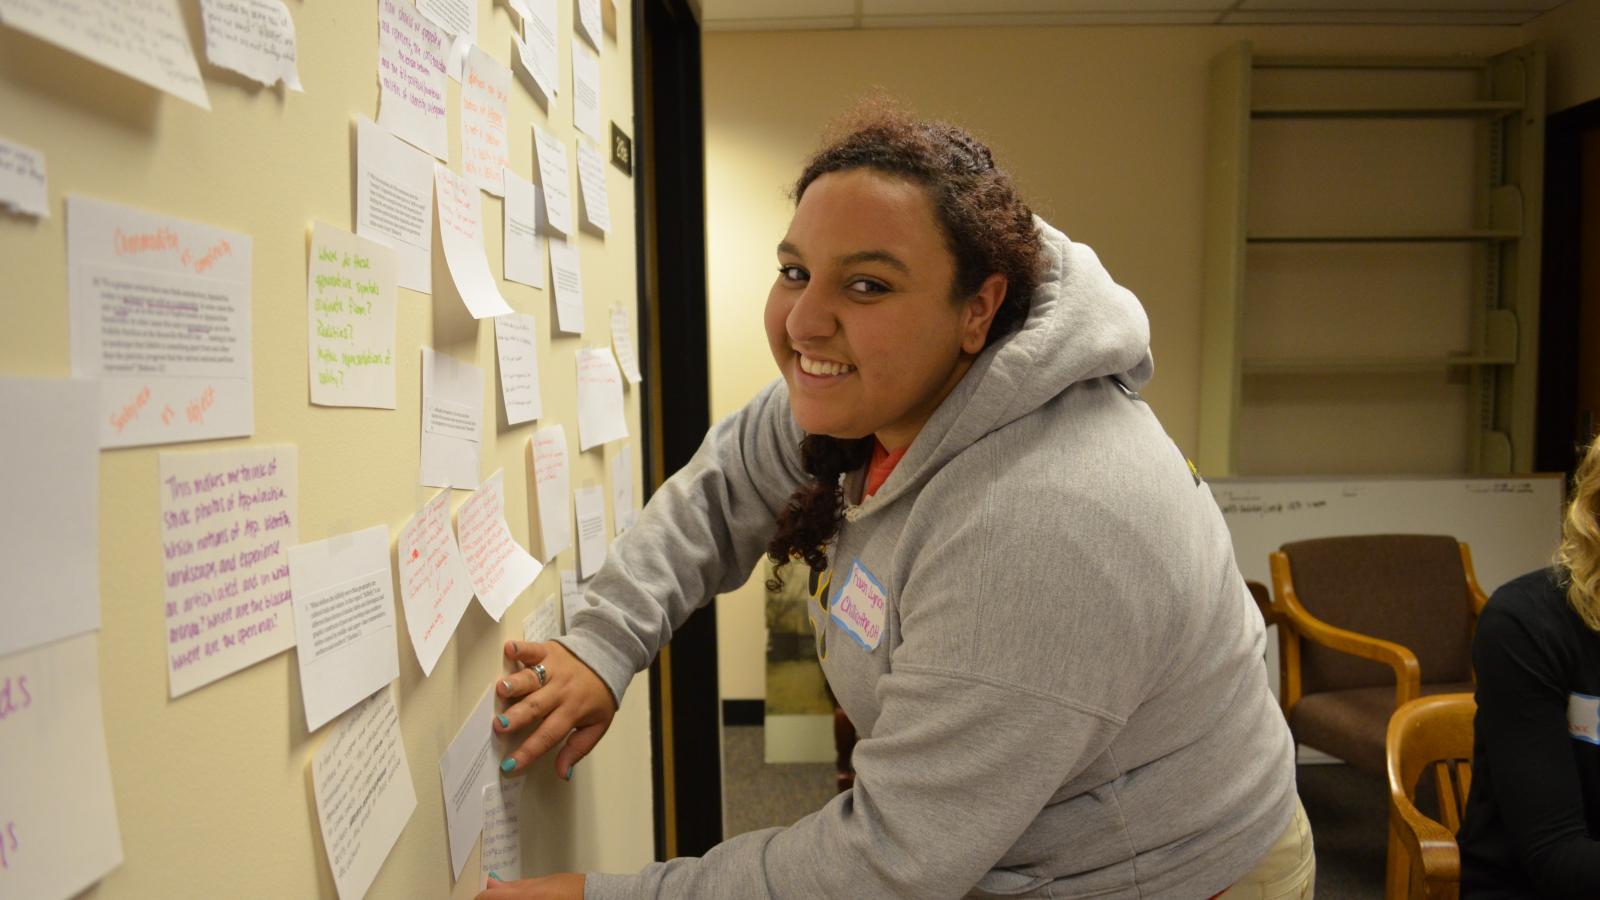 Raven Lynch posts on the brainstorm board at the 2013 retreat